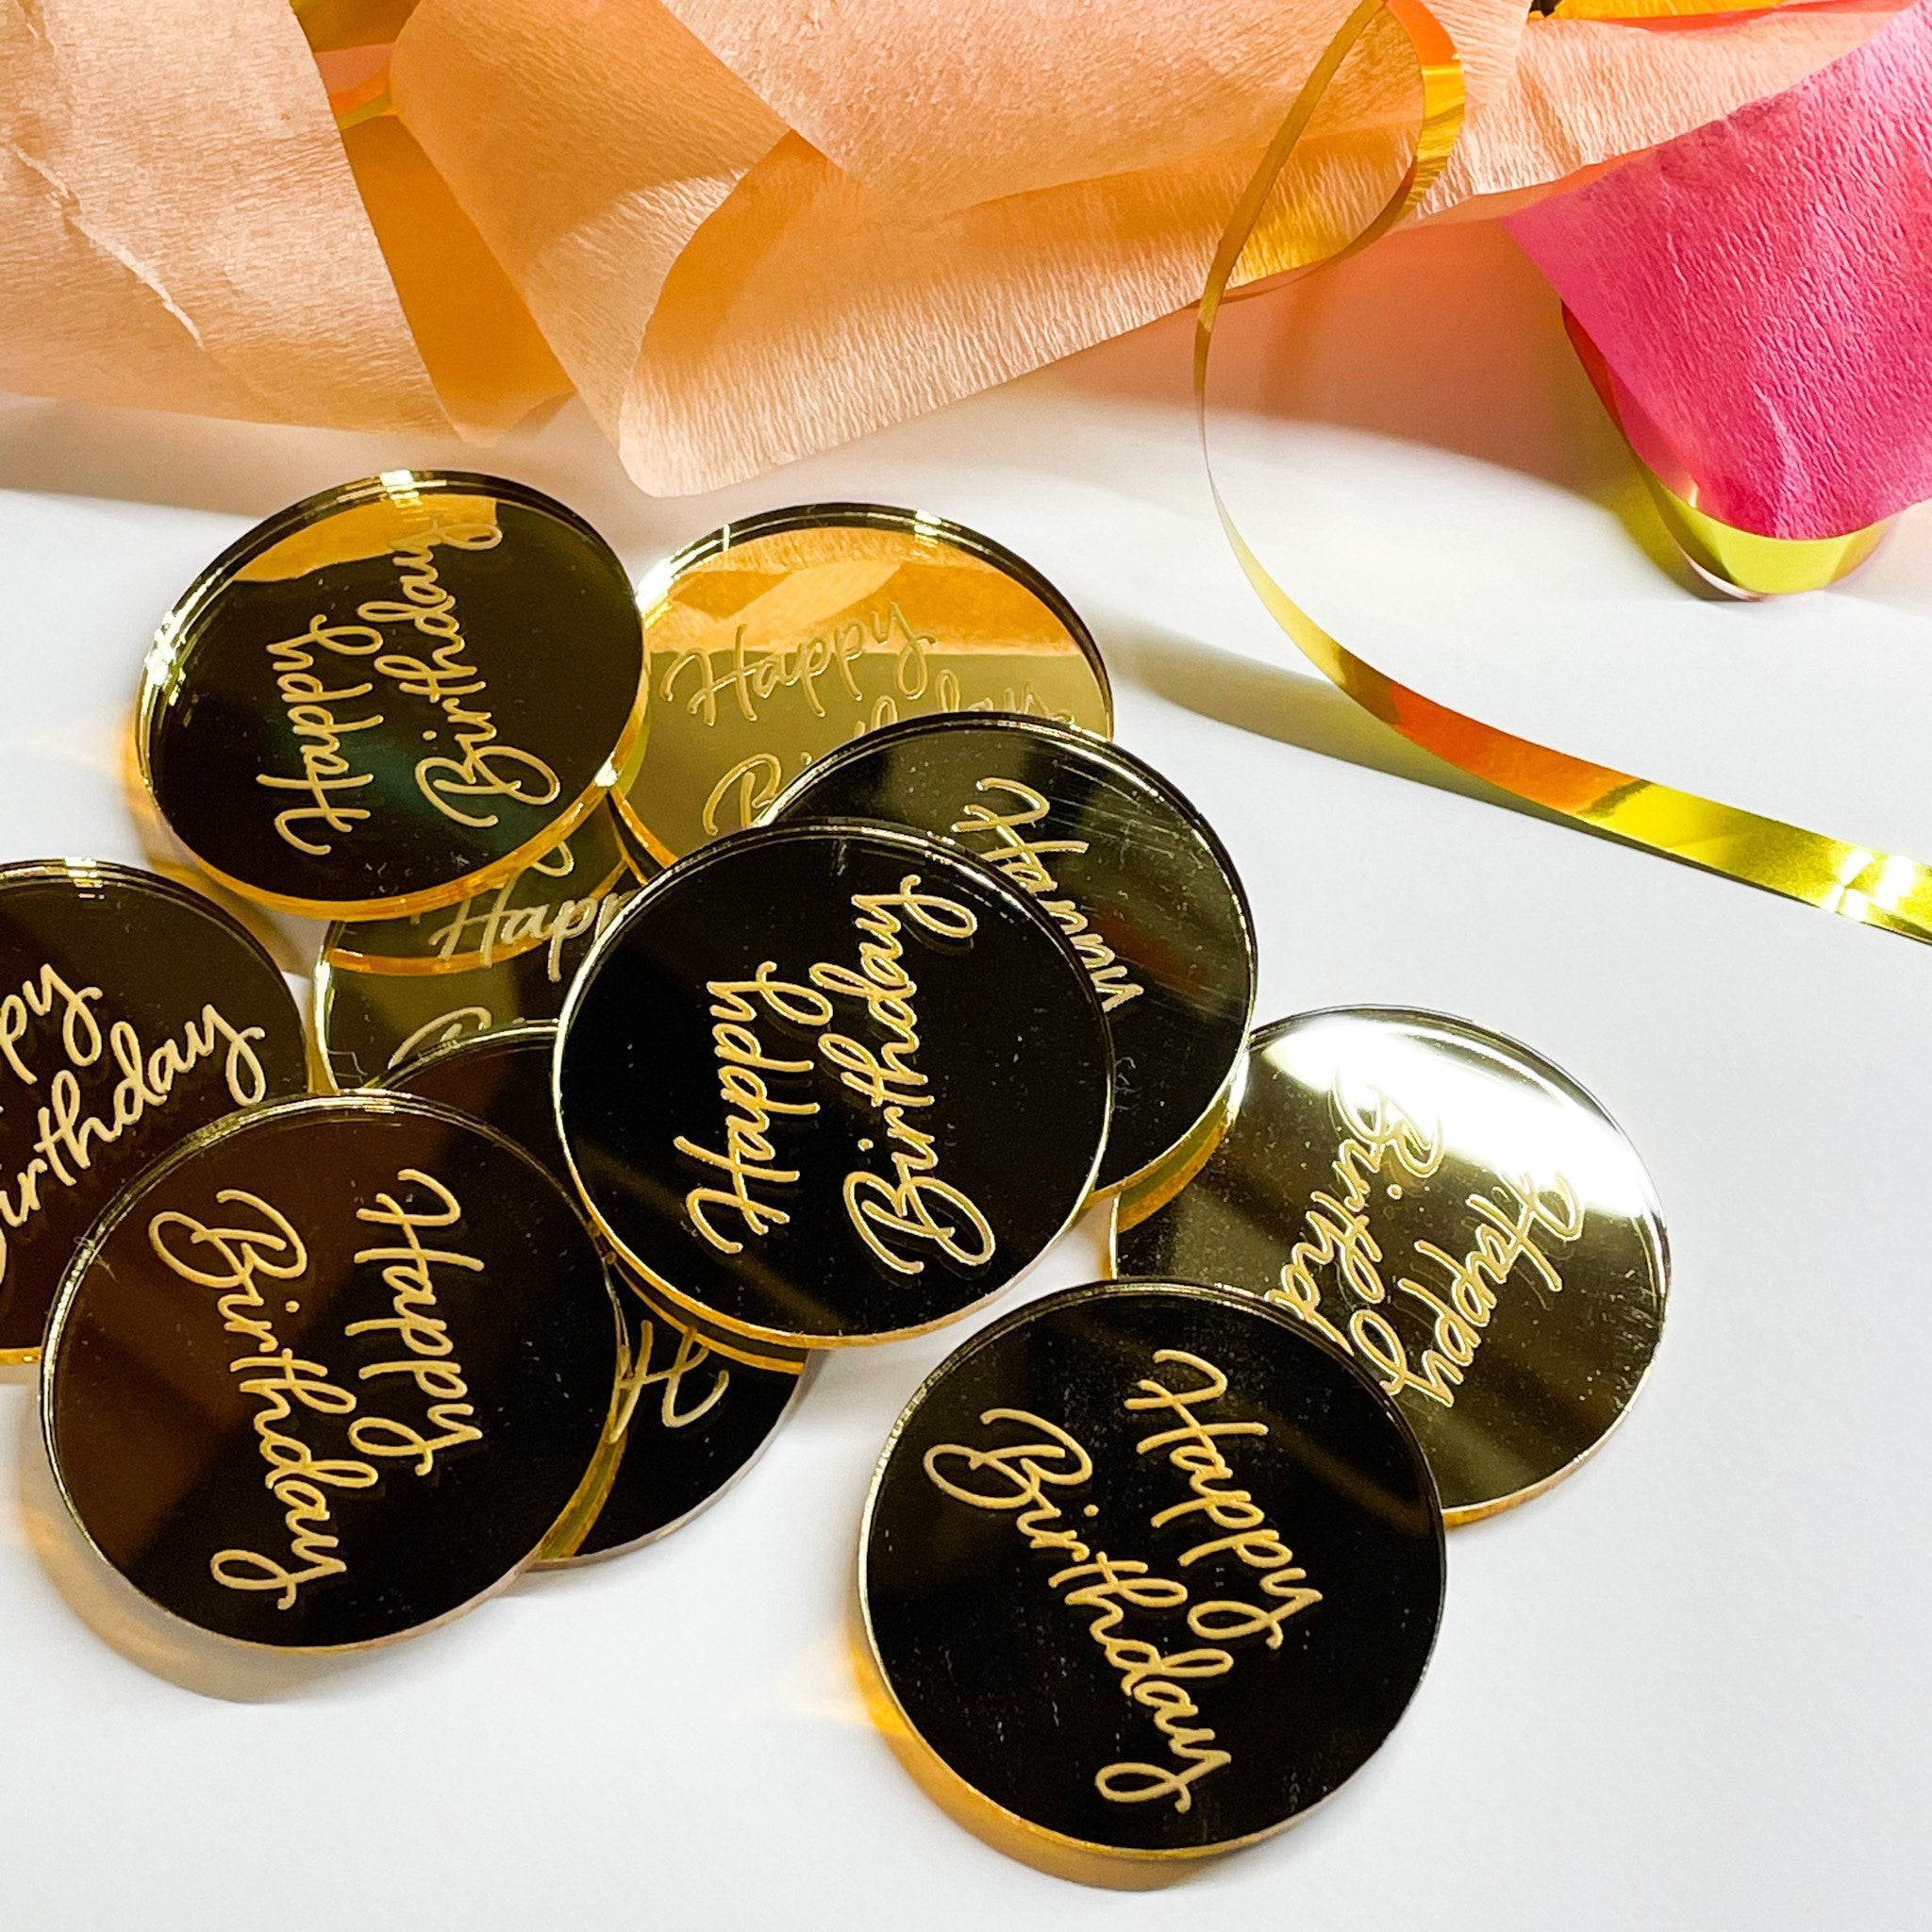 Happy Birthday Cupcake Plaques - Pack of 5 - Gold Mirror